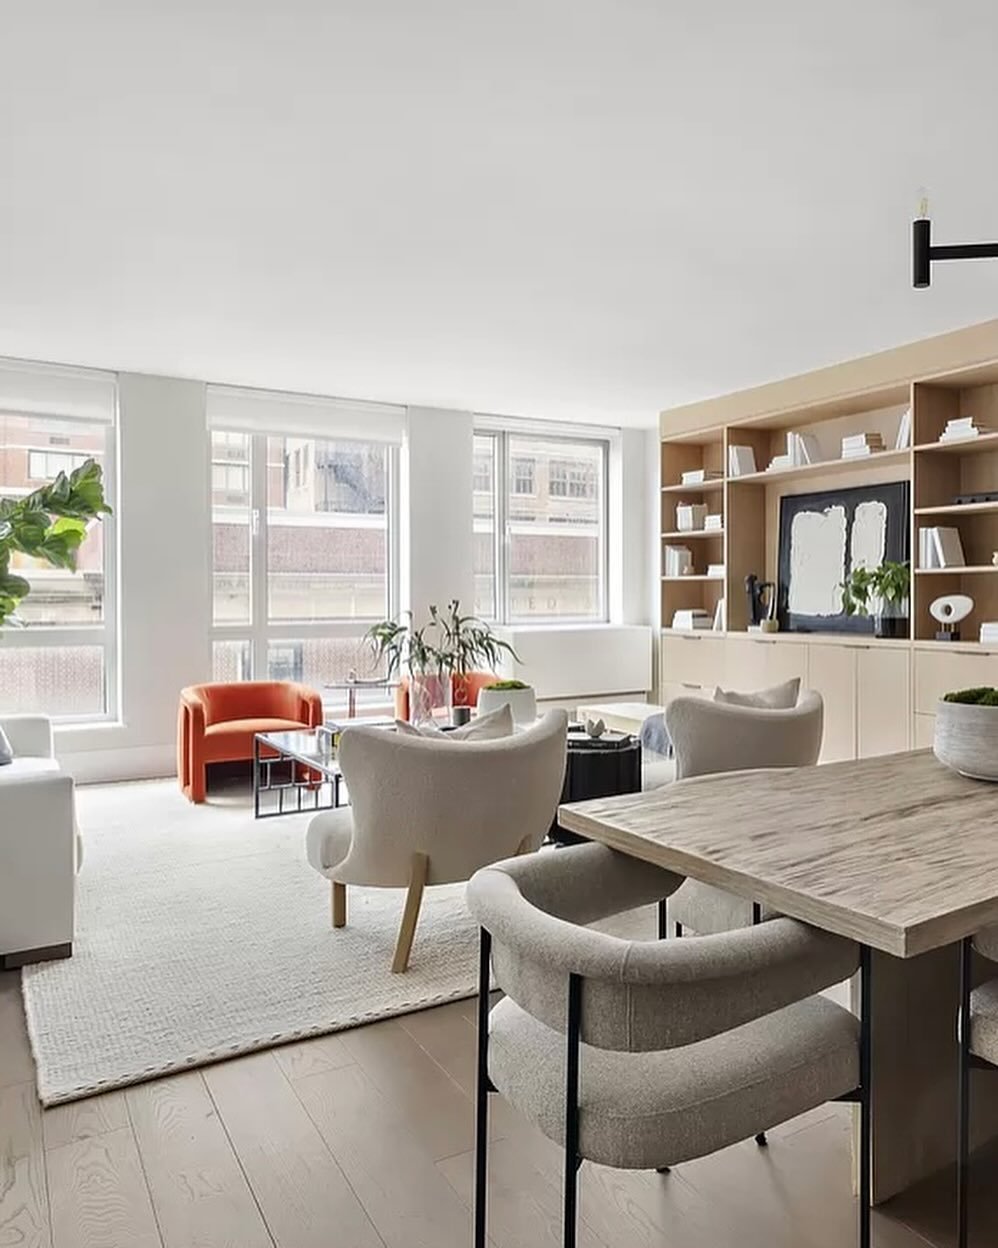 Generous proportions and high-end finishes throughout this gut renovated, mint-condition residence located in a boutique full-service Chelsea condominium. 

3 bedrooms and 2 bathrooms 

224 West 18th St, 4A
Offered at: $3,175,000

For more details, p